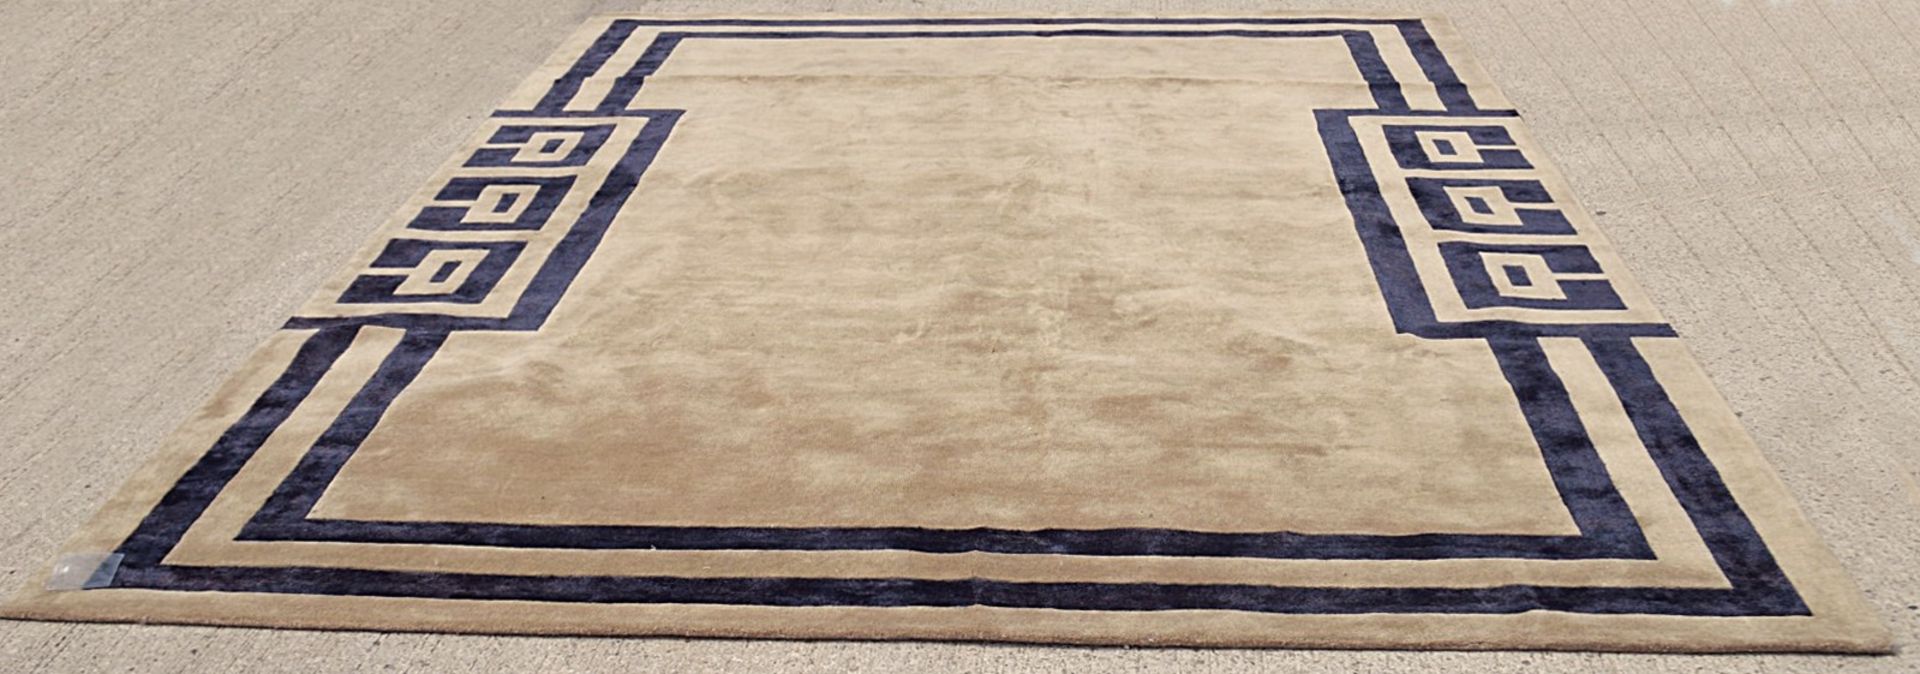 1 x GIORGIO COLLECTION 'Vogue Julius' Hand Knotted Wool & Silk Carpet Rug - Original RRP £10,080 - Image 7 of 14